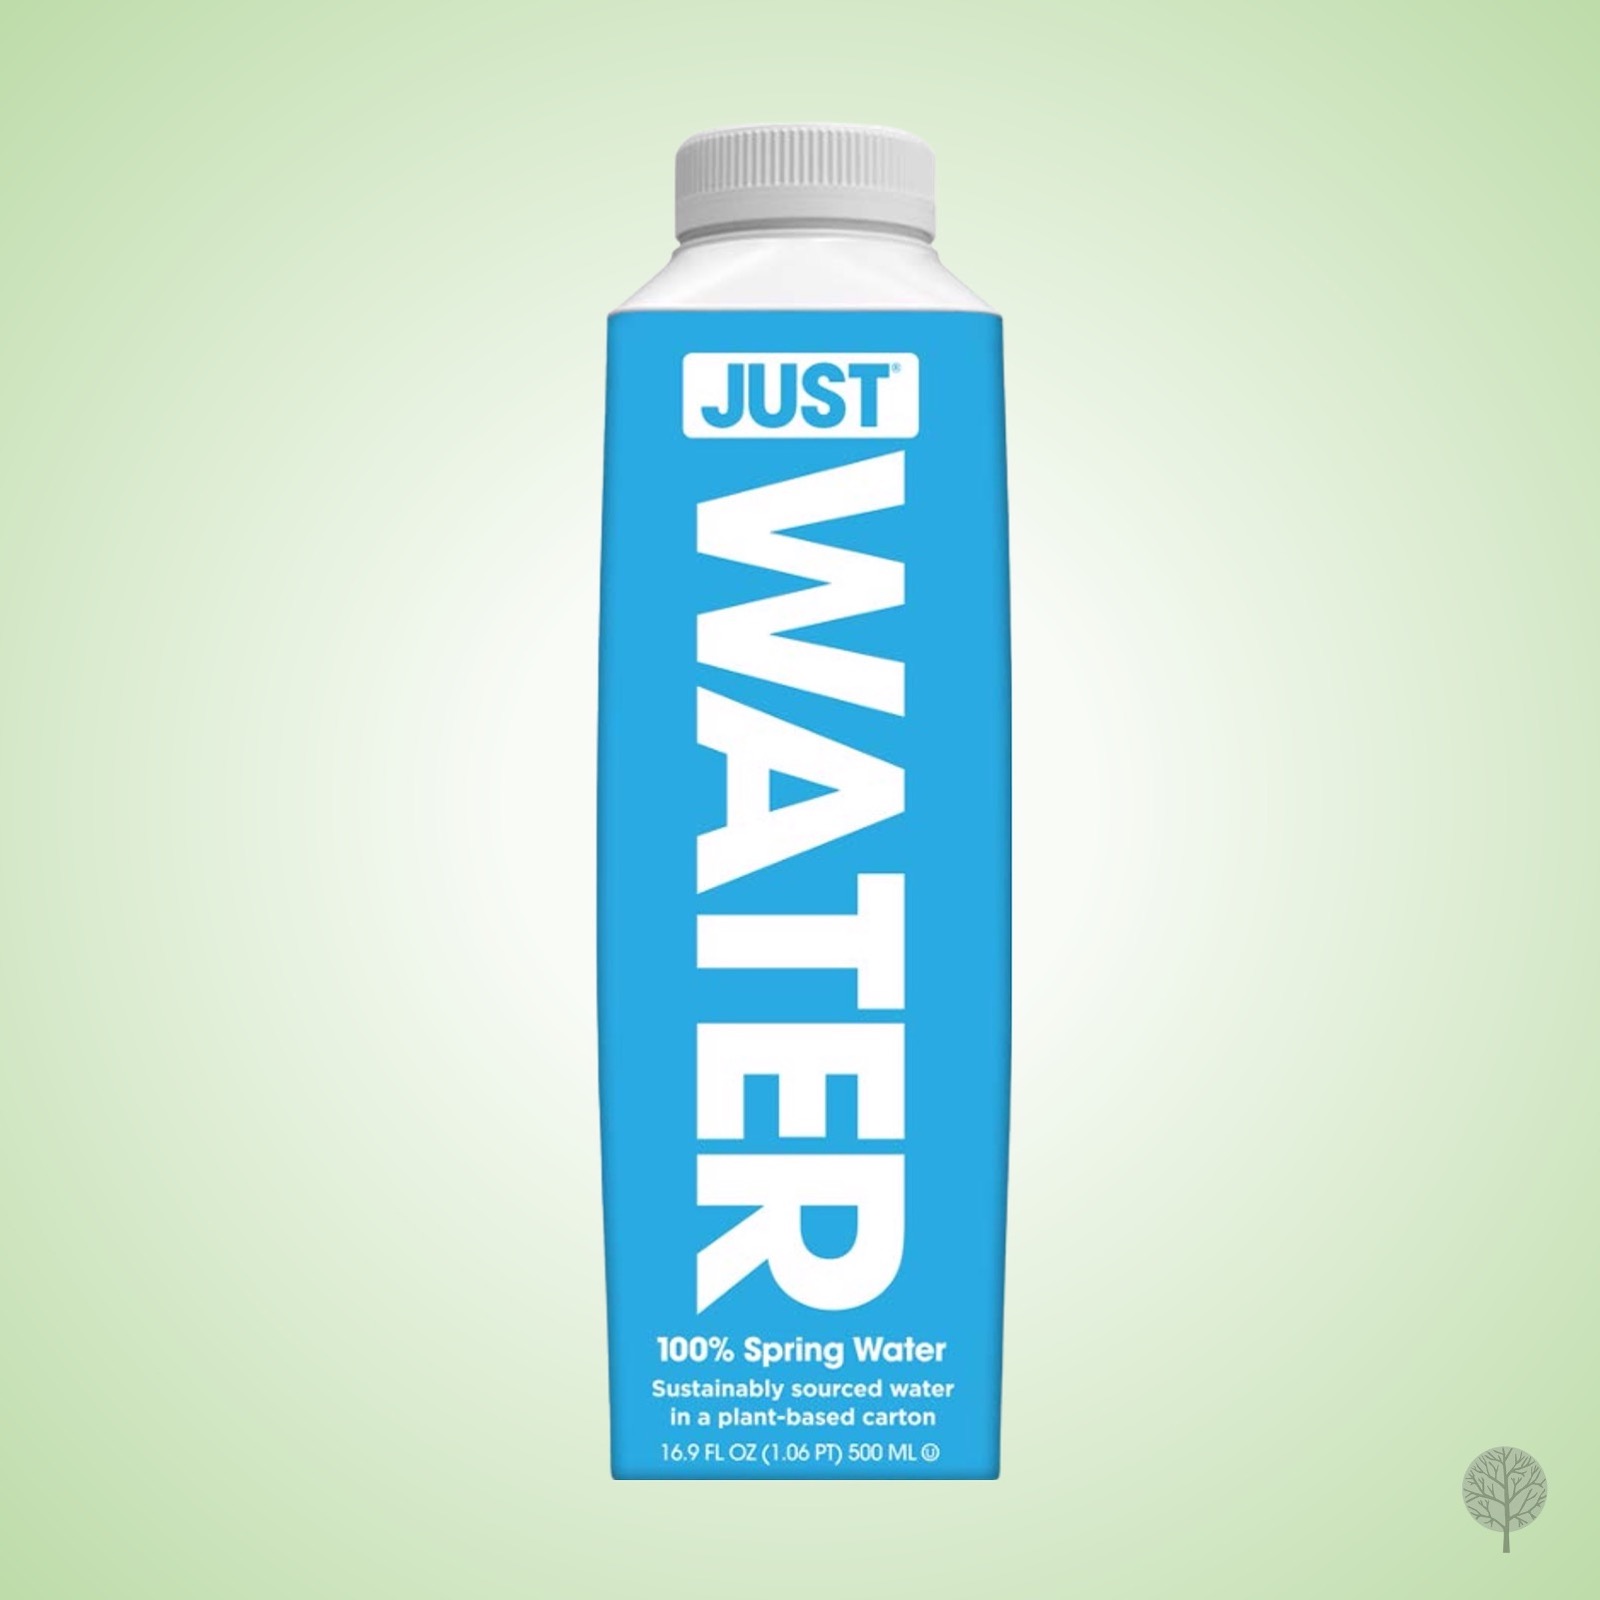 JUST Water